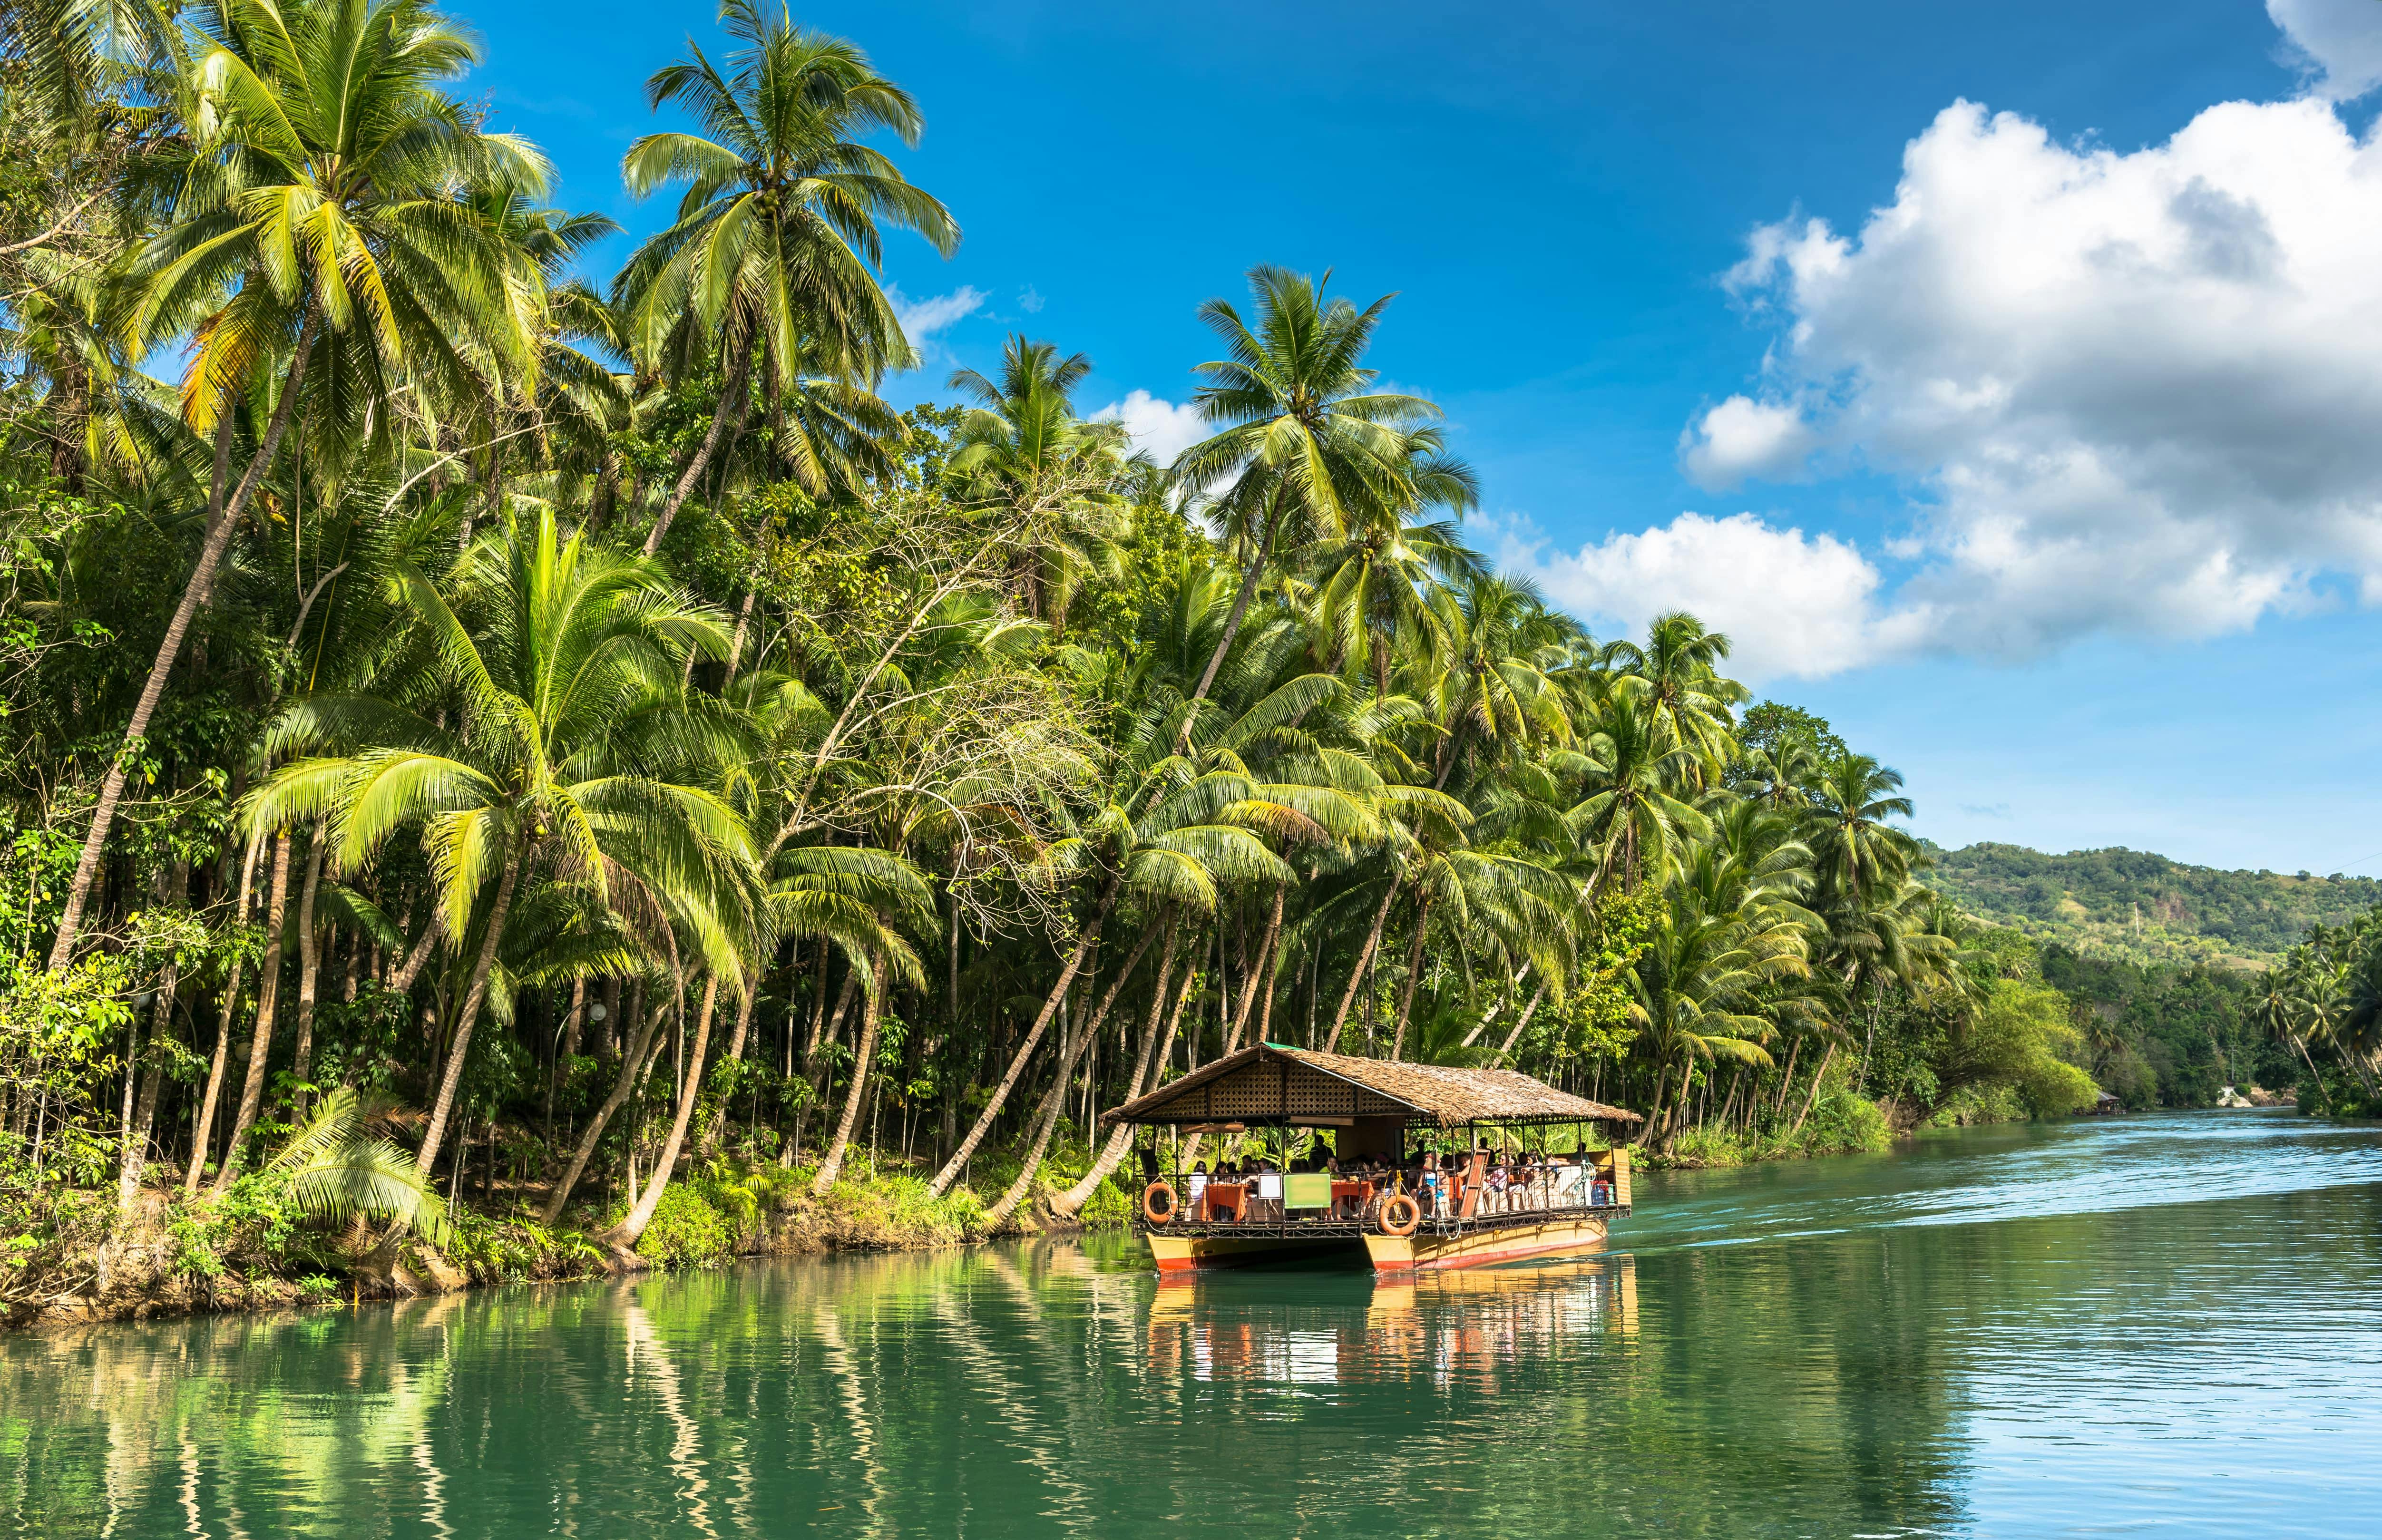 Peaceful environment during the Loboc River Cruise in Bohol